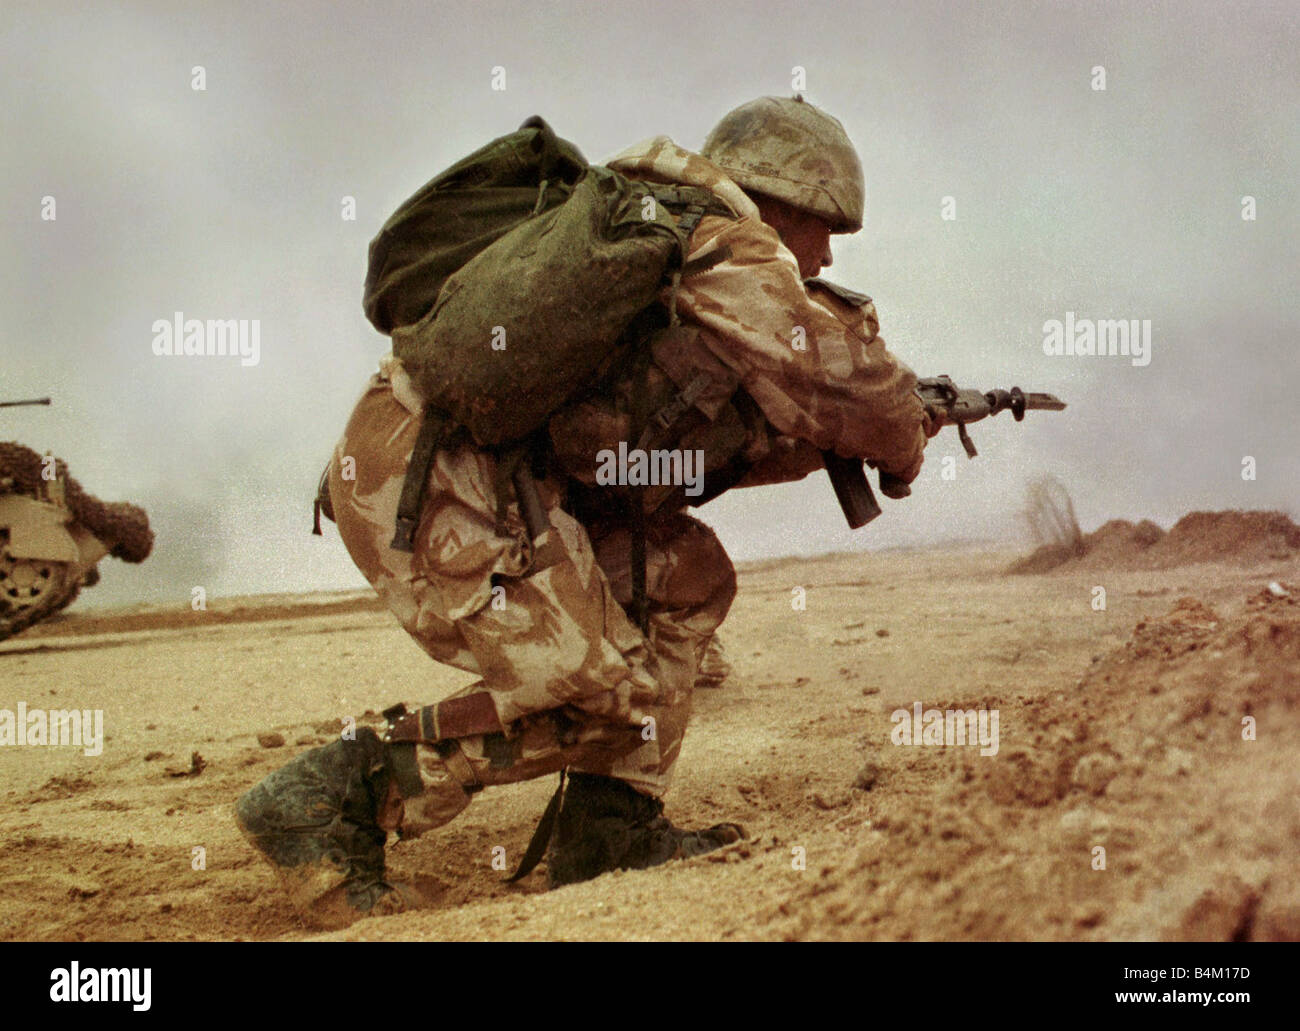 Gulf War British Army 1991 The only photographs showing ground troops in action 10 years ago in the Iraqi desert during the action to liberate Kuwait Mike Moore photographed Private Thomas Gow as Under fire Gow jumps up and runs forward across the mine strewn no mans land Crouching down Gow throws a grenade and destroys the enemy vehicle allowing the advance to continue Private Gow was awarded the Military Medal by the Queen for his bravery that morning Stock Photo